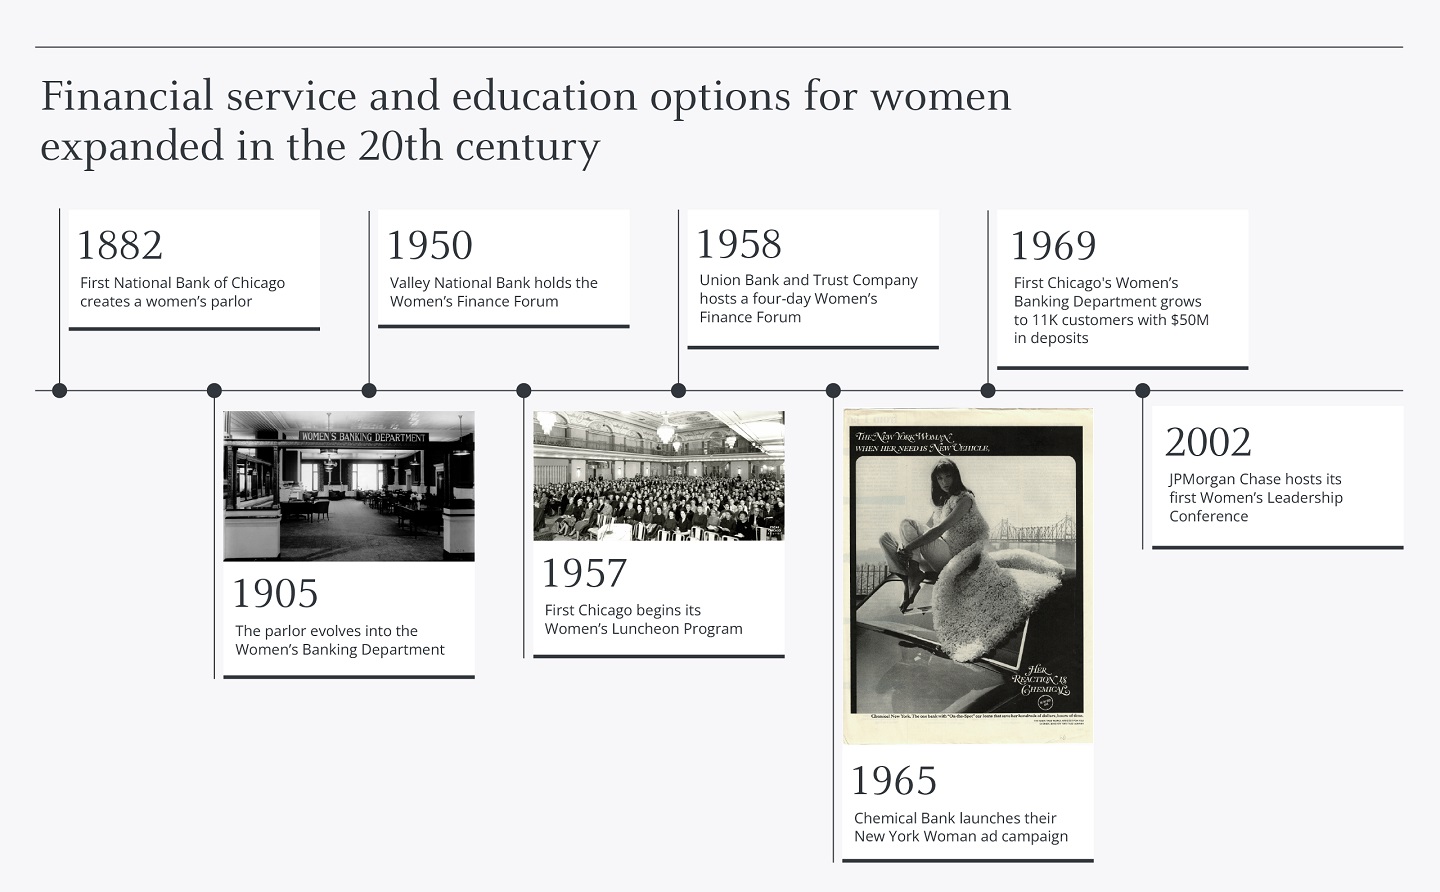 Chart displays milestones from 1882 to 2002 regarding financial service and education options for women in the 20<sup>th</sup> century.